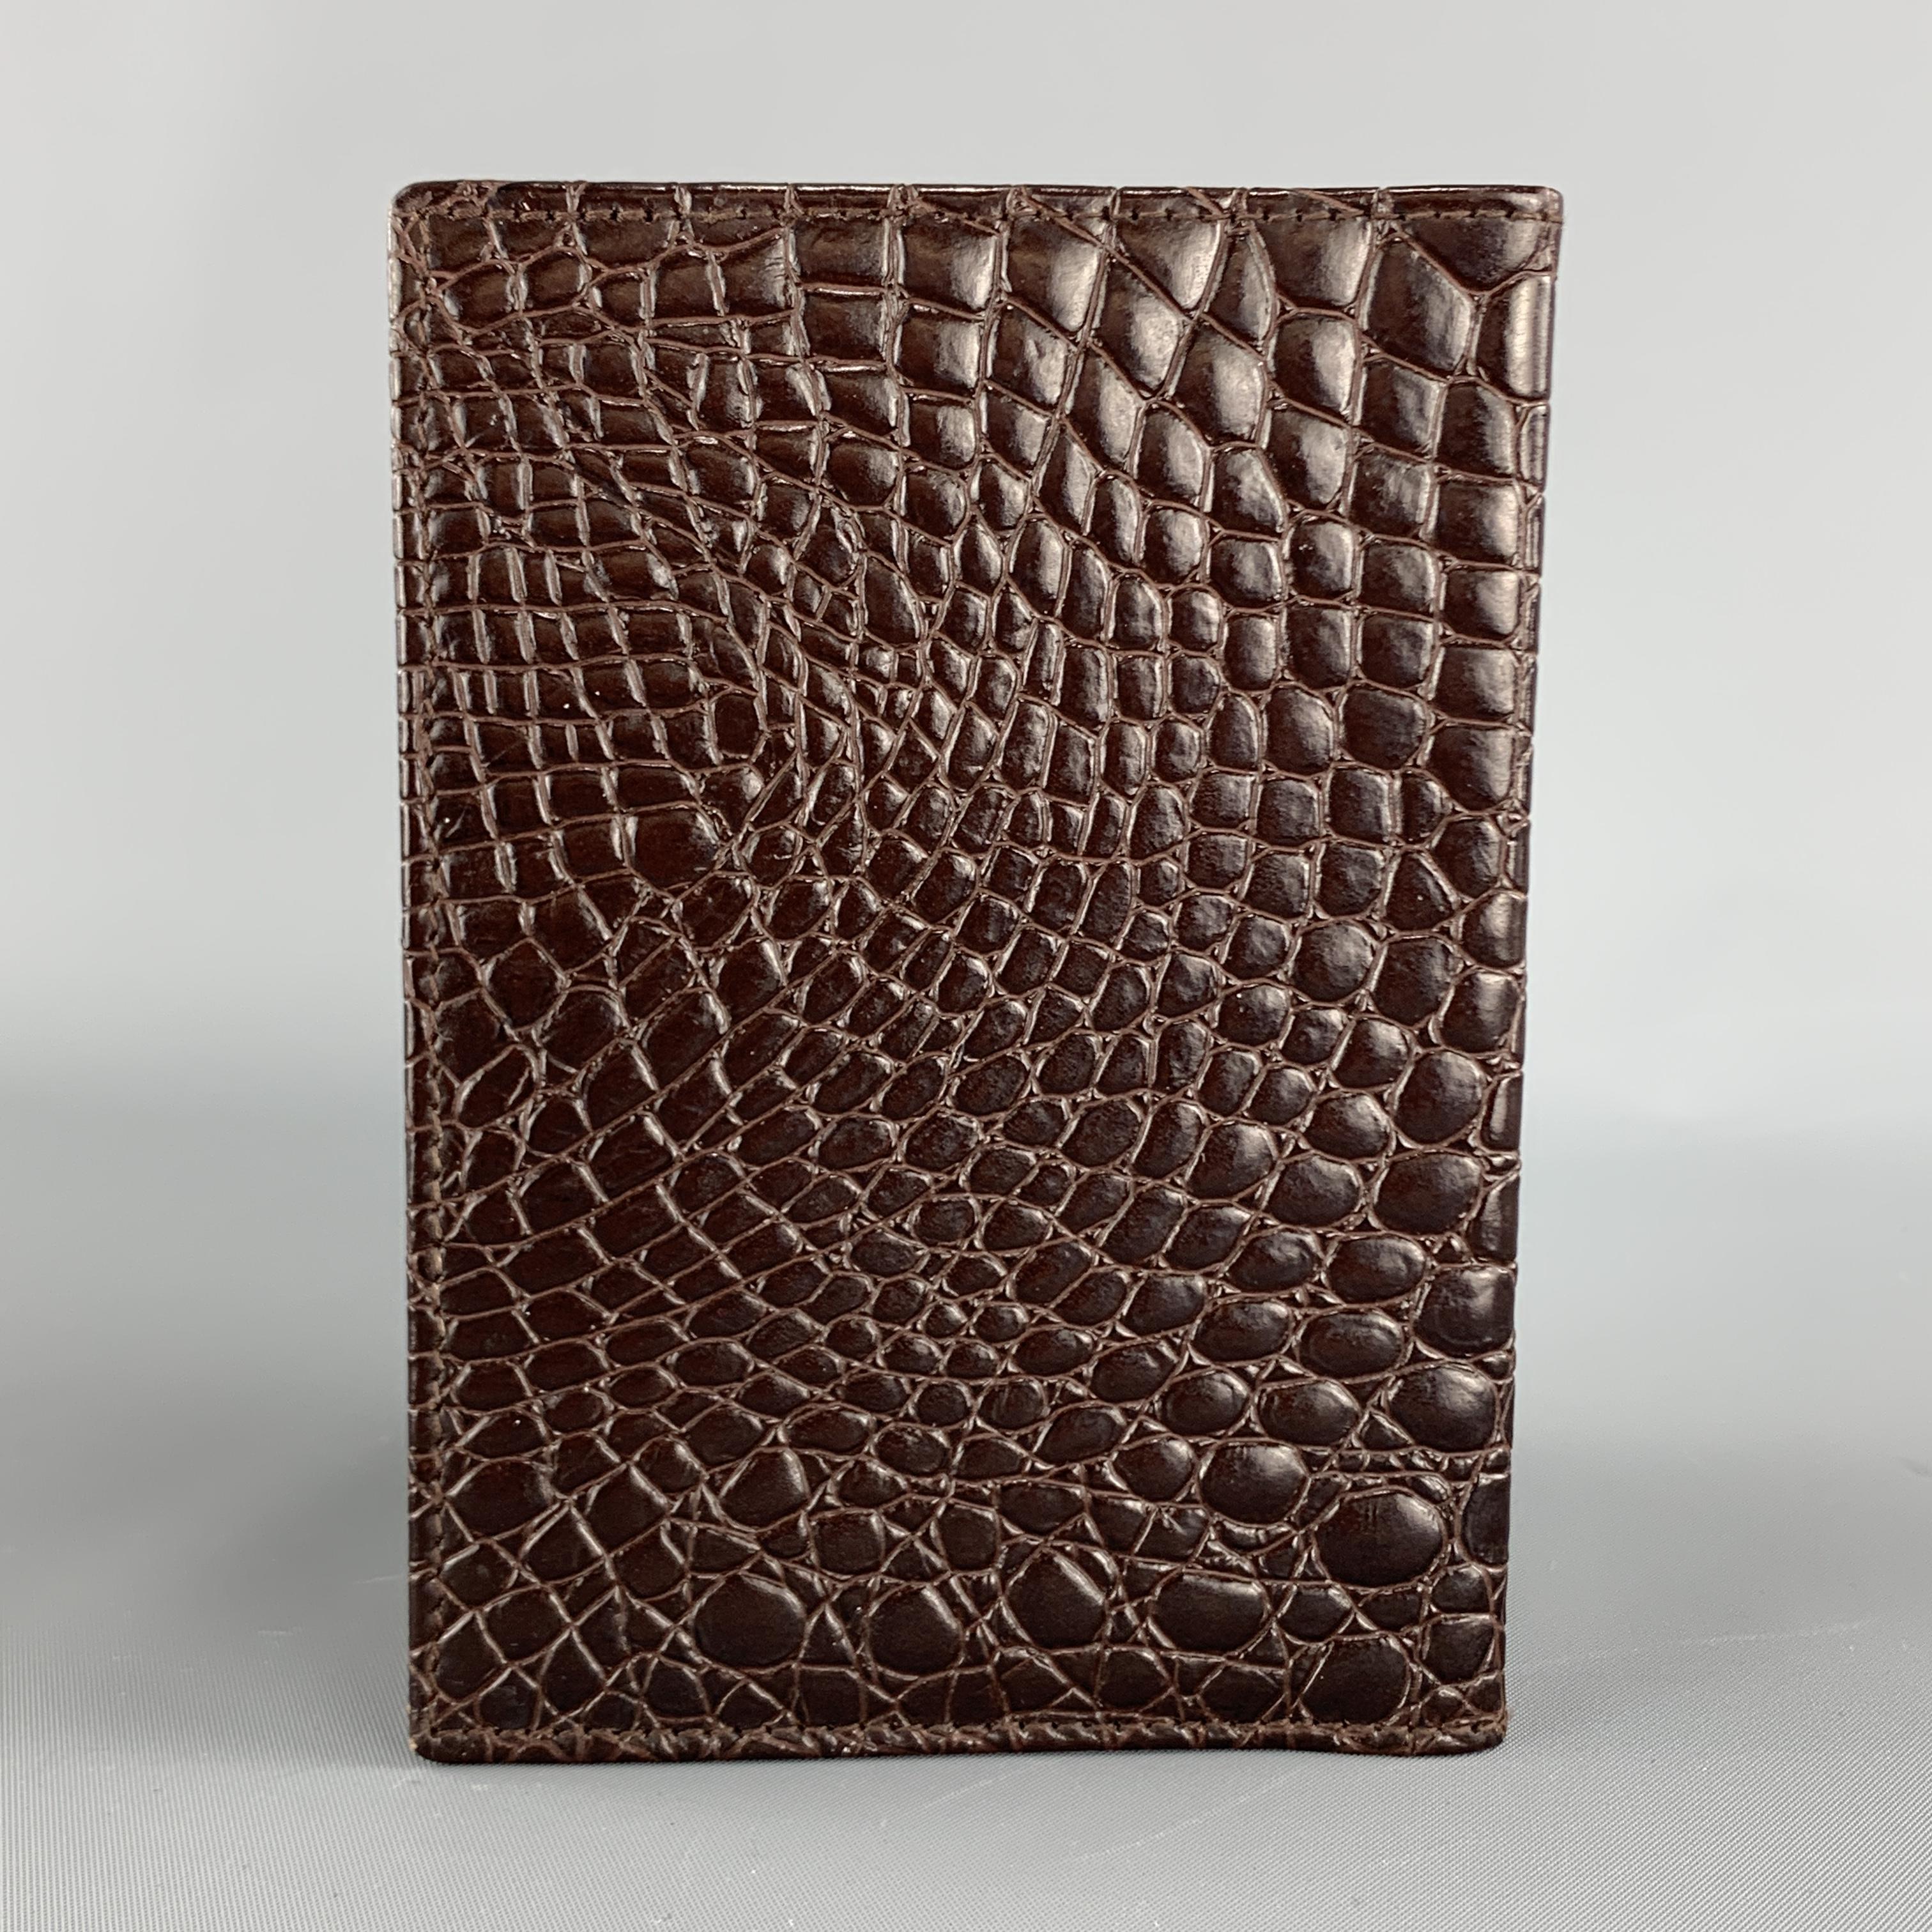 BUDD LEATHER passport holder comes in brown alligator embossed leather with internal slots. Made in Spain.

Excellent Pre-Owned Condition.

3.95 x 5.5 in.